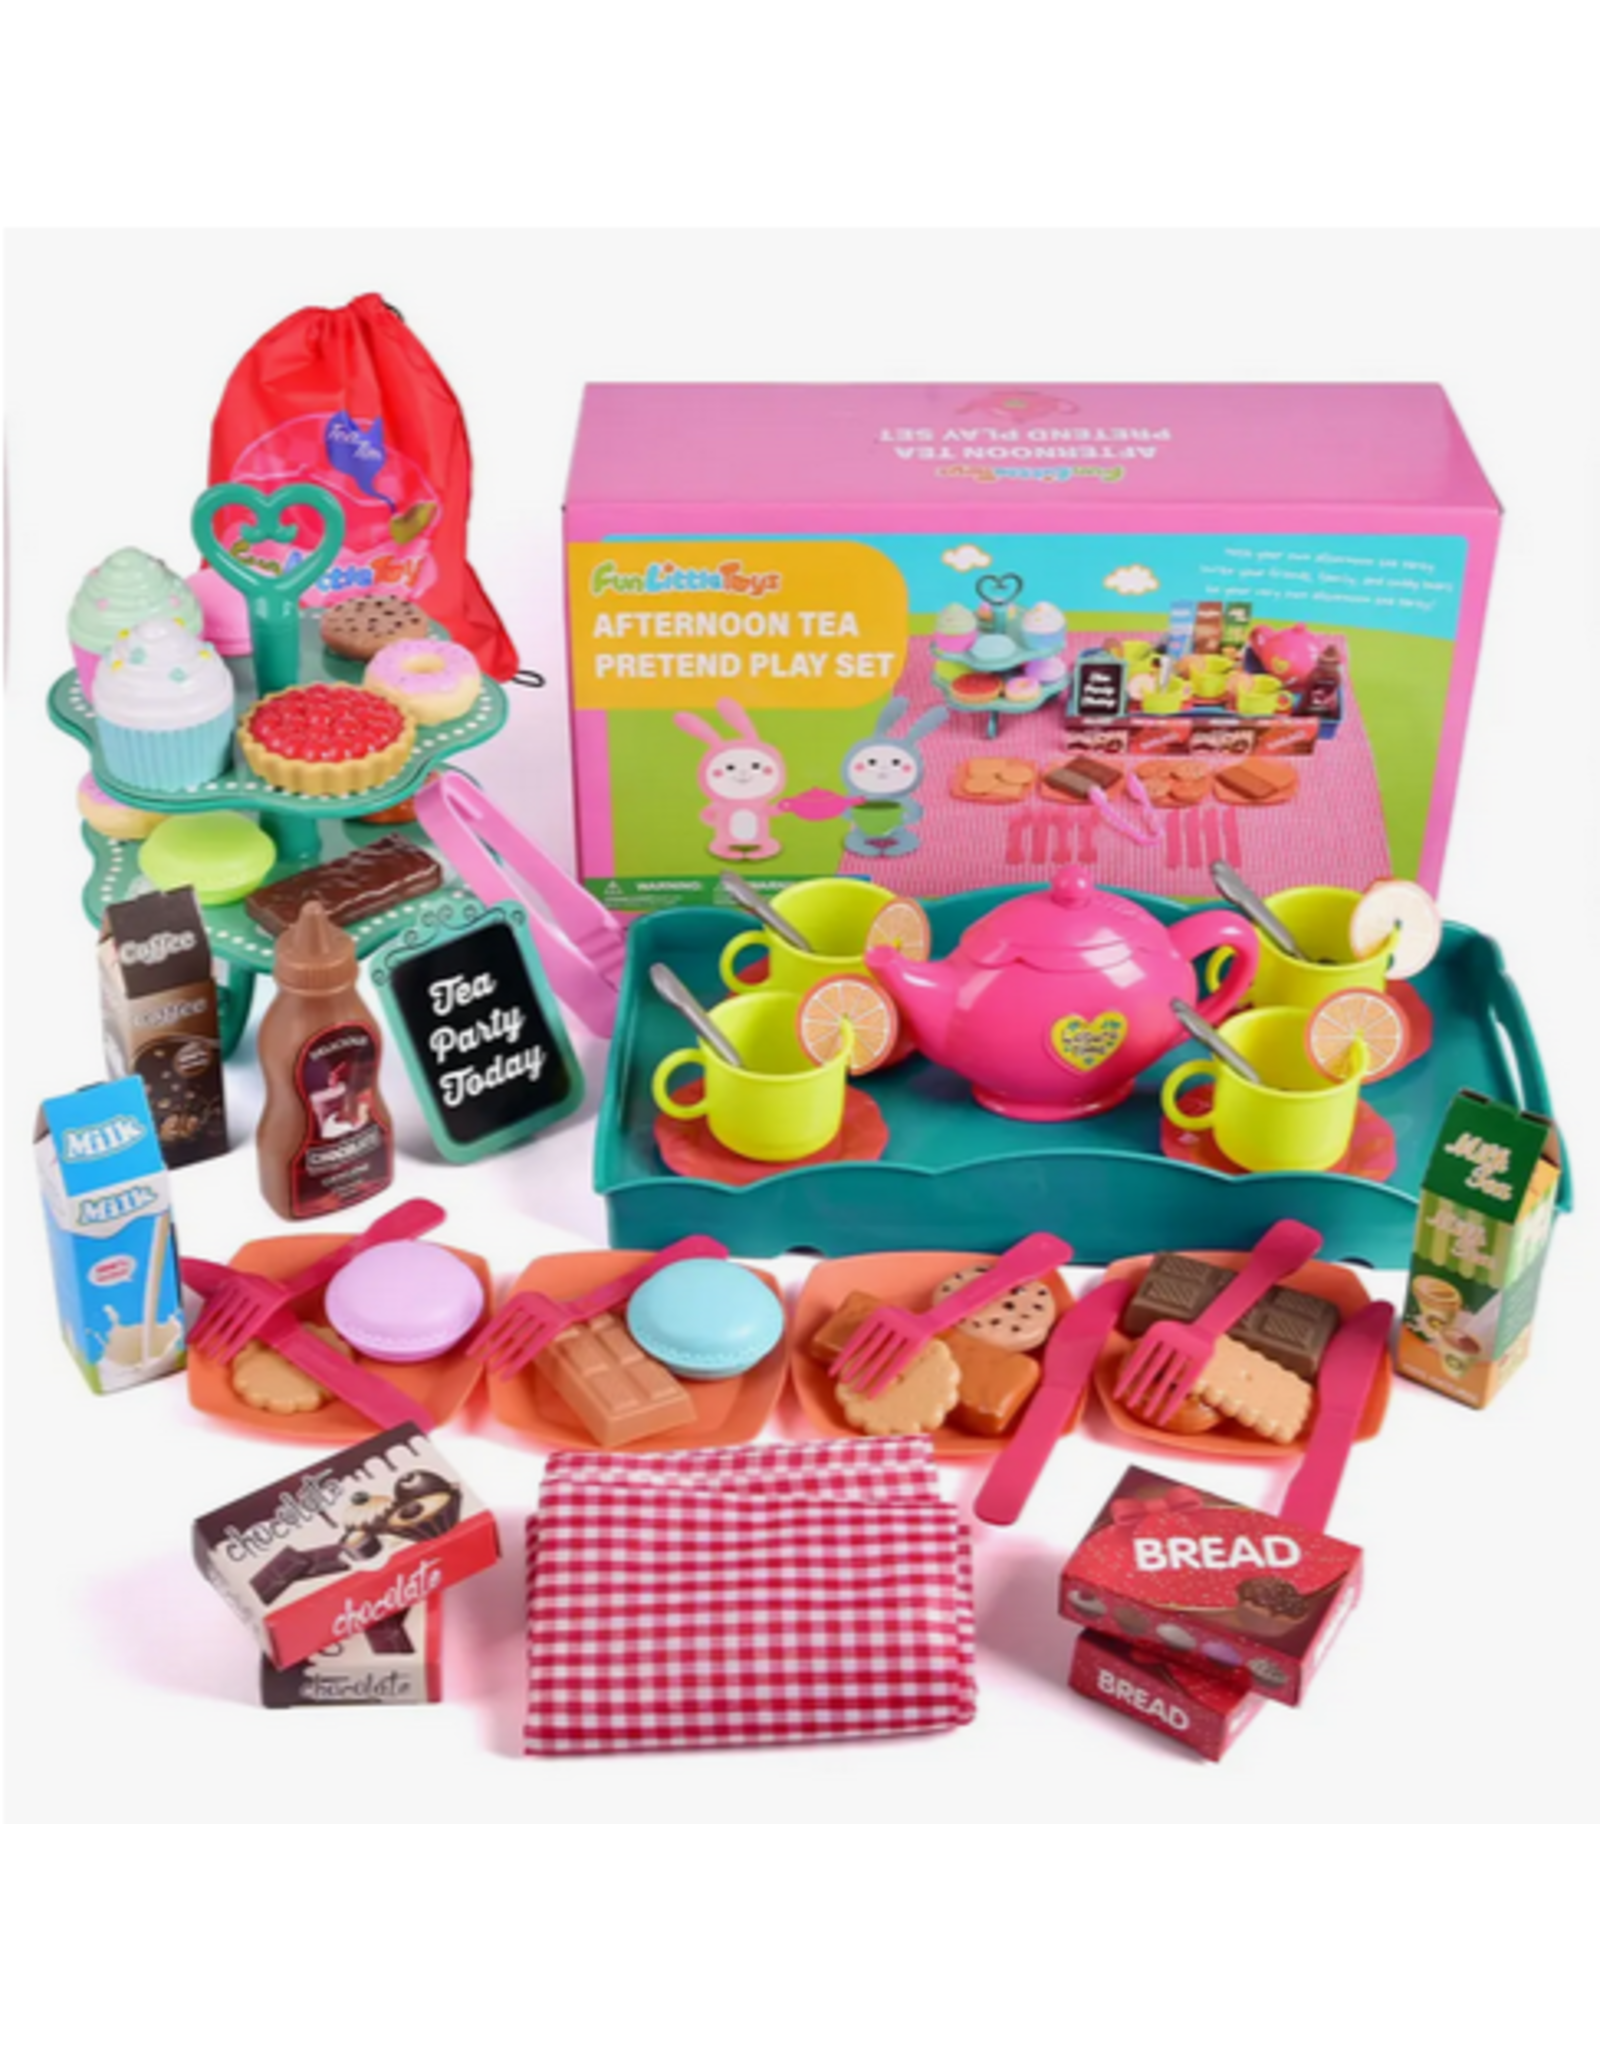 Girl's Afternoon Tea Party -Pretend Play Set 64 Pc. - Callie's